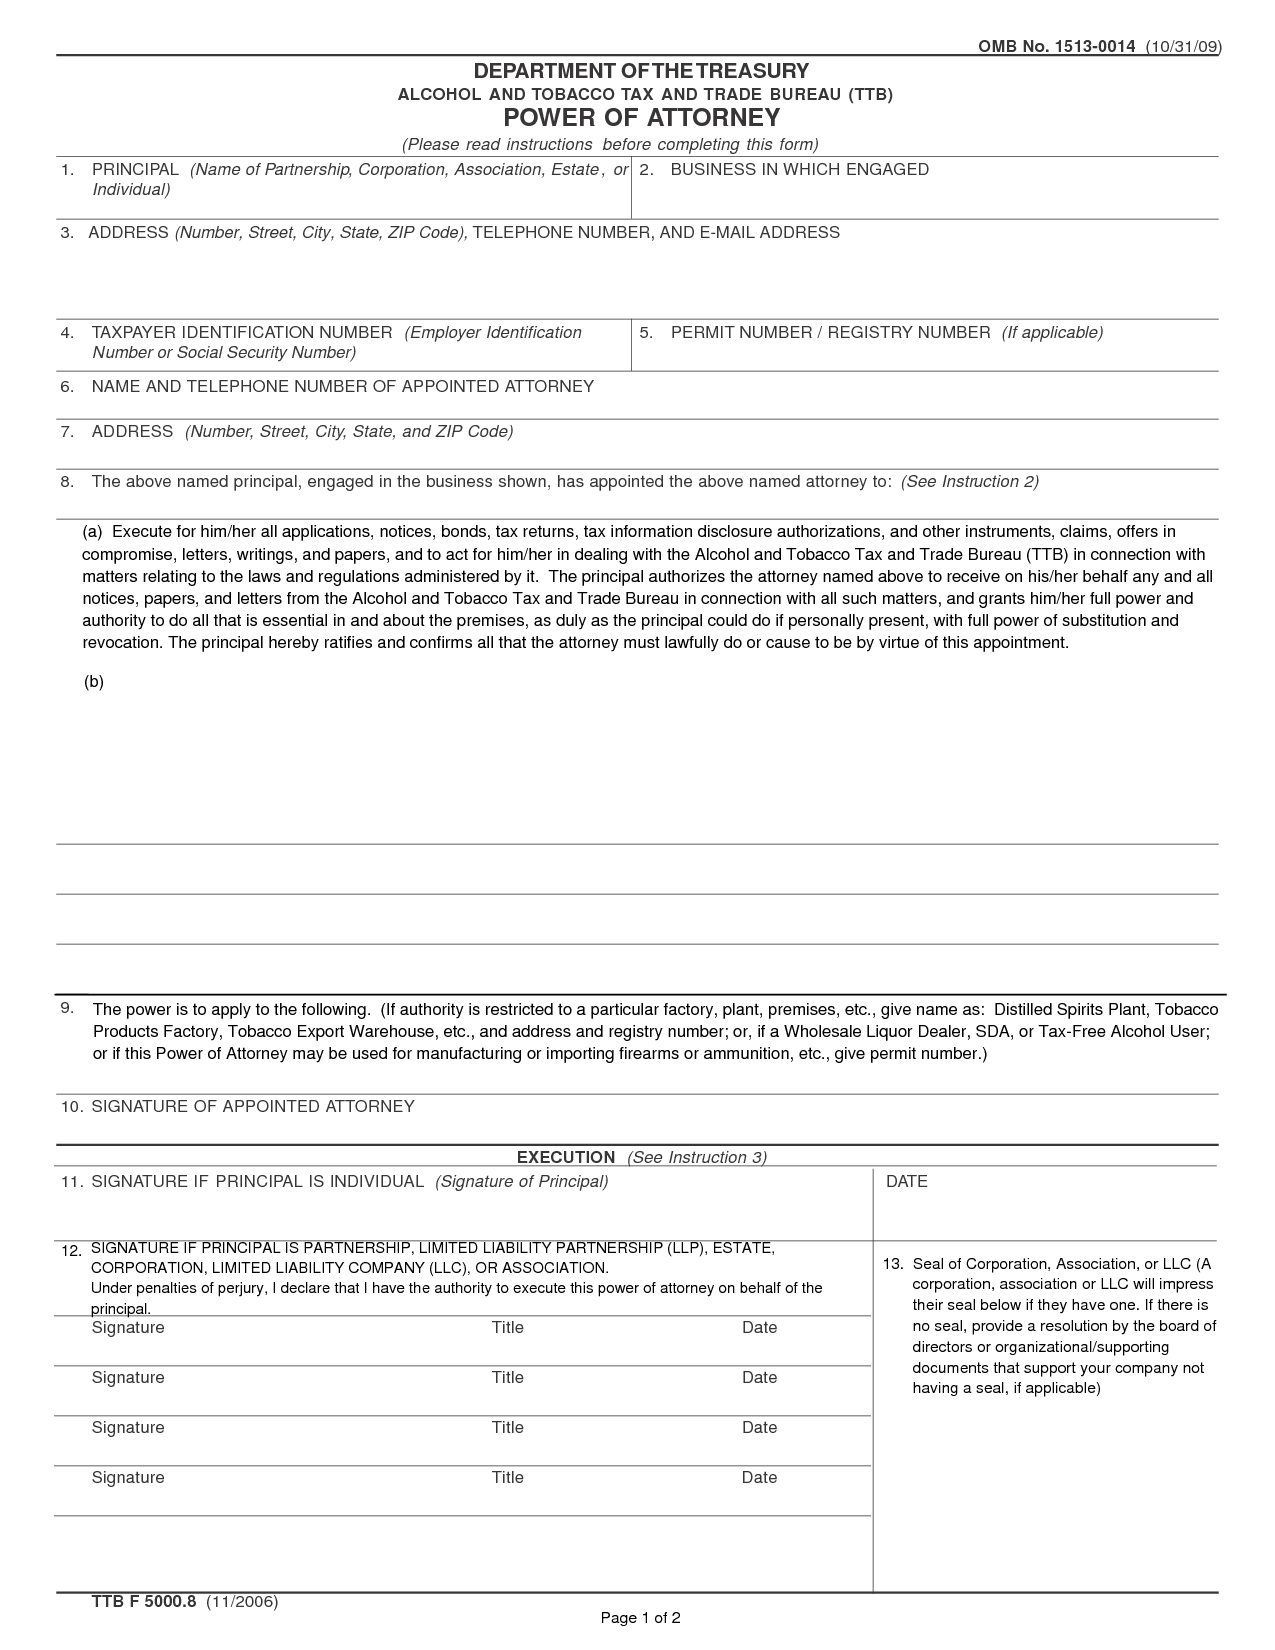 Power Of attorney Letter Template Free - Unique Power attorney form Template